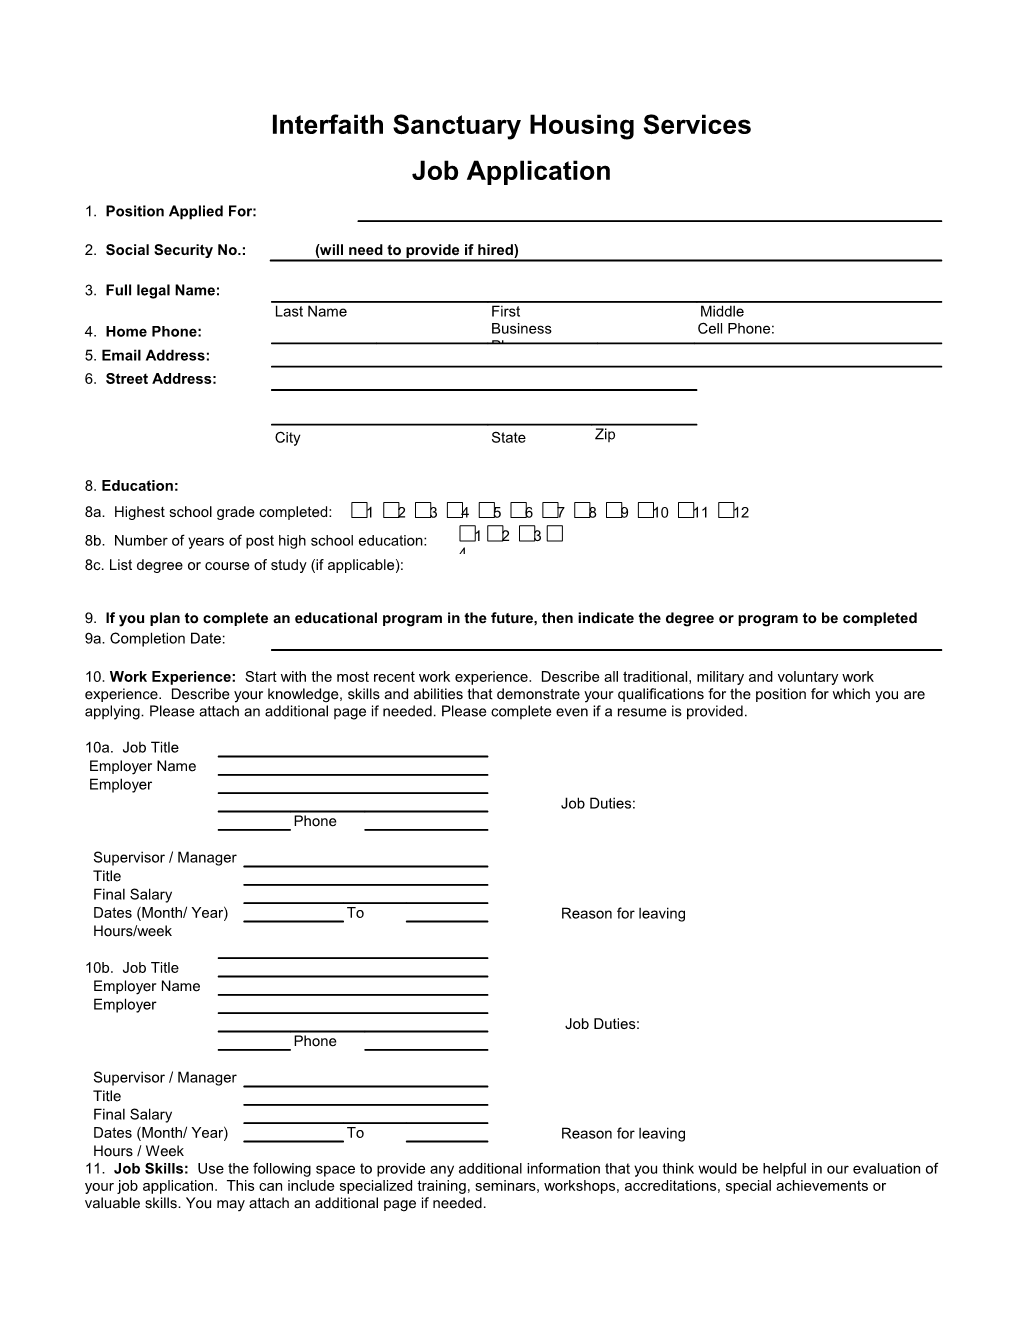 Application Instructions: Please Email Cover Letter, Resume, and Application to and Include